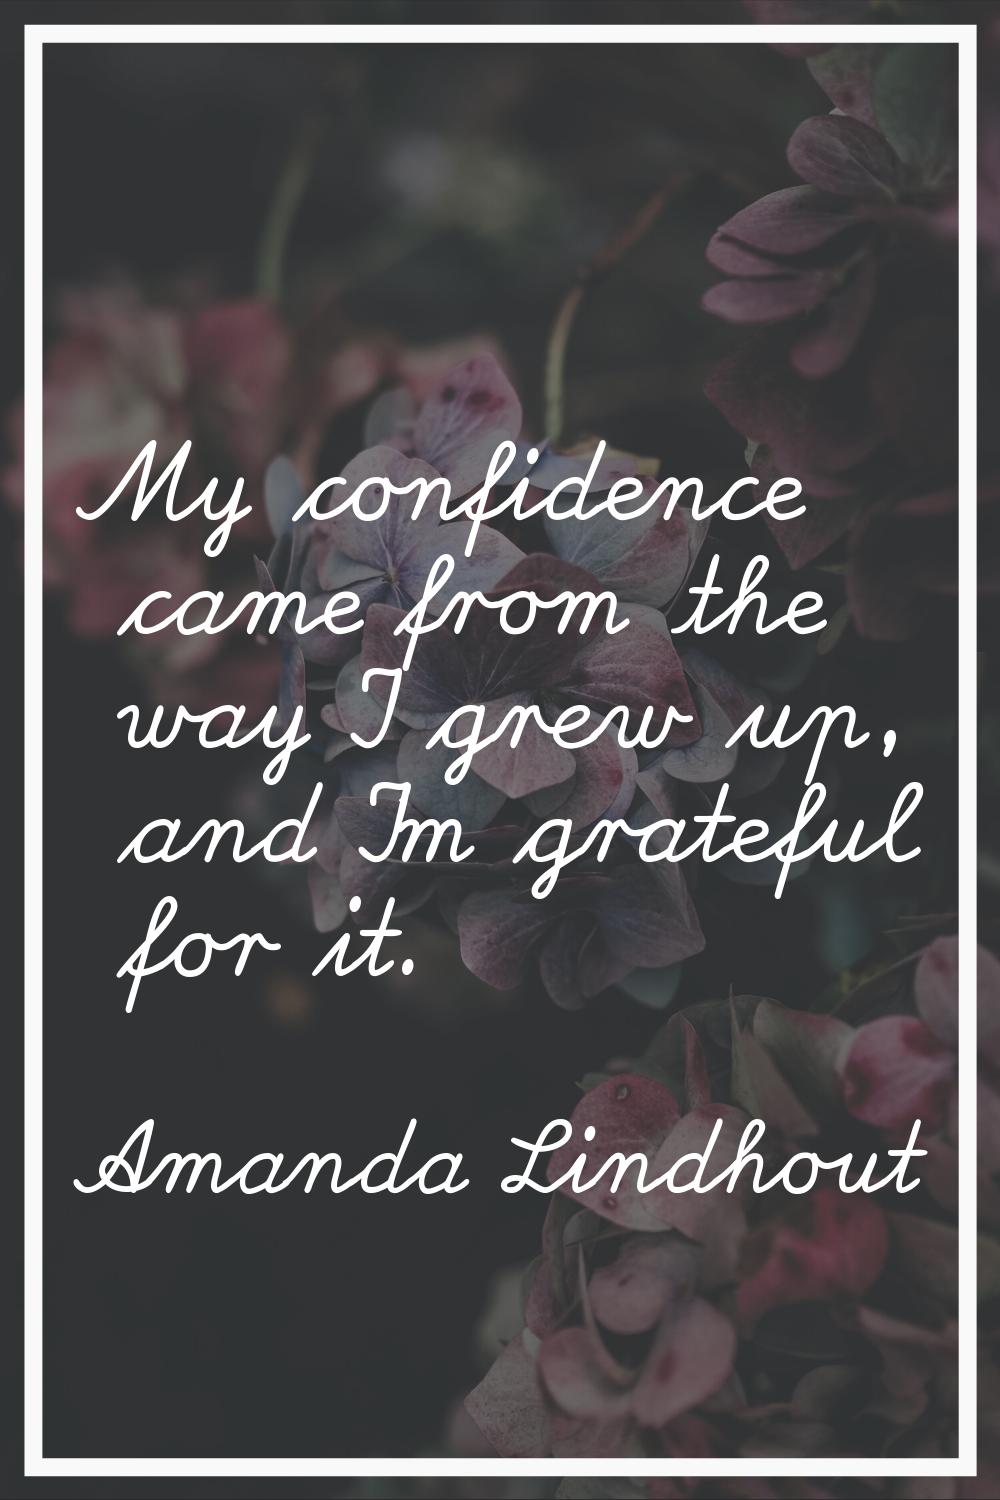 My confidence came from the way I grew up, and I'm grateful for it.